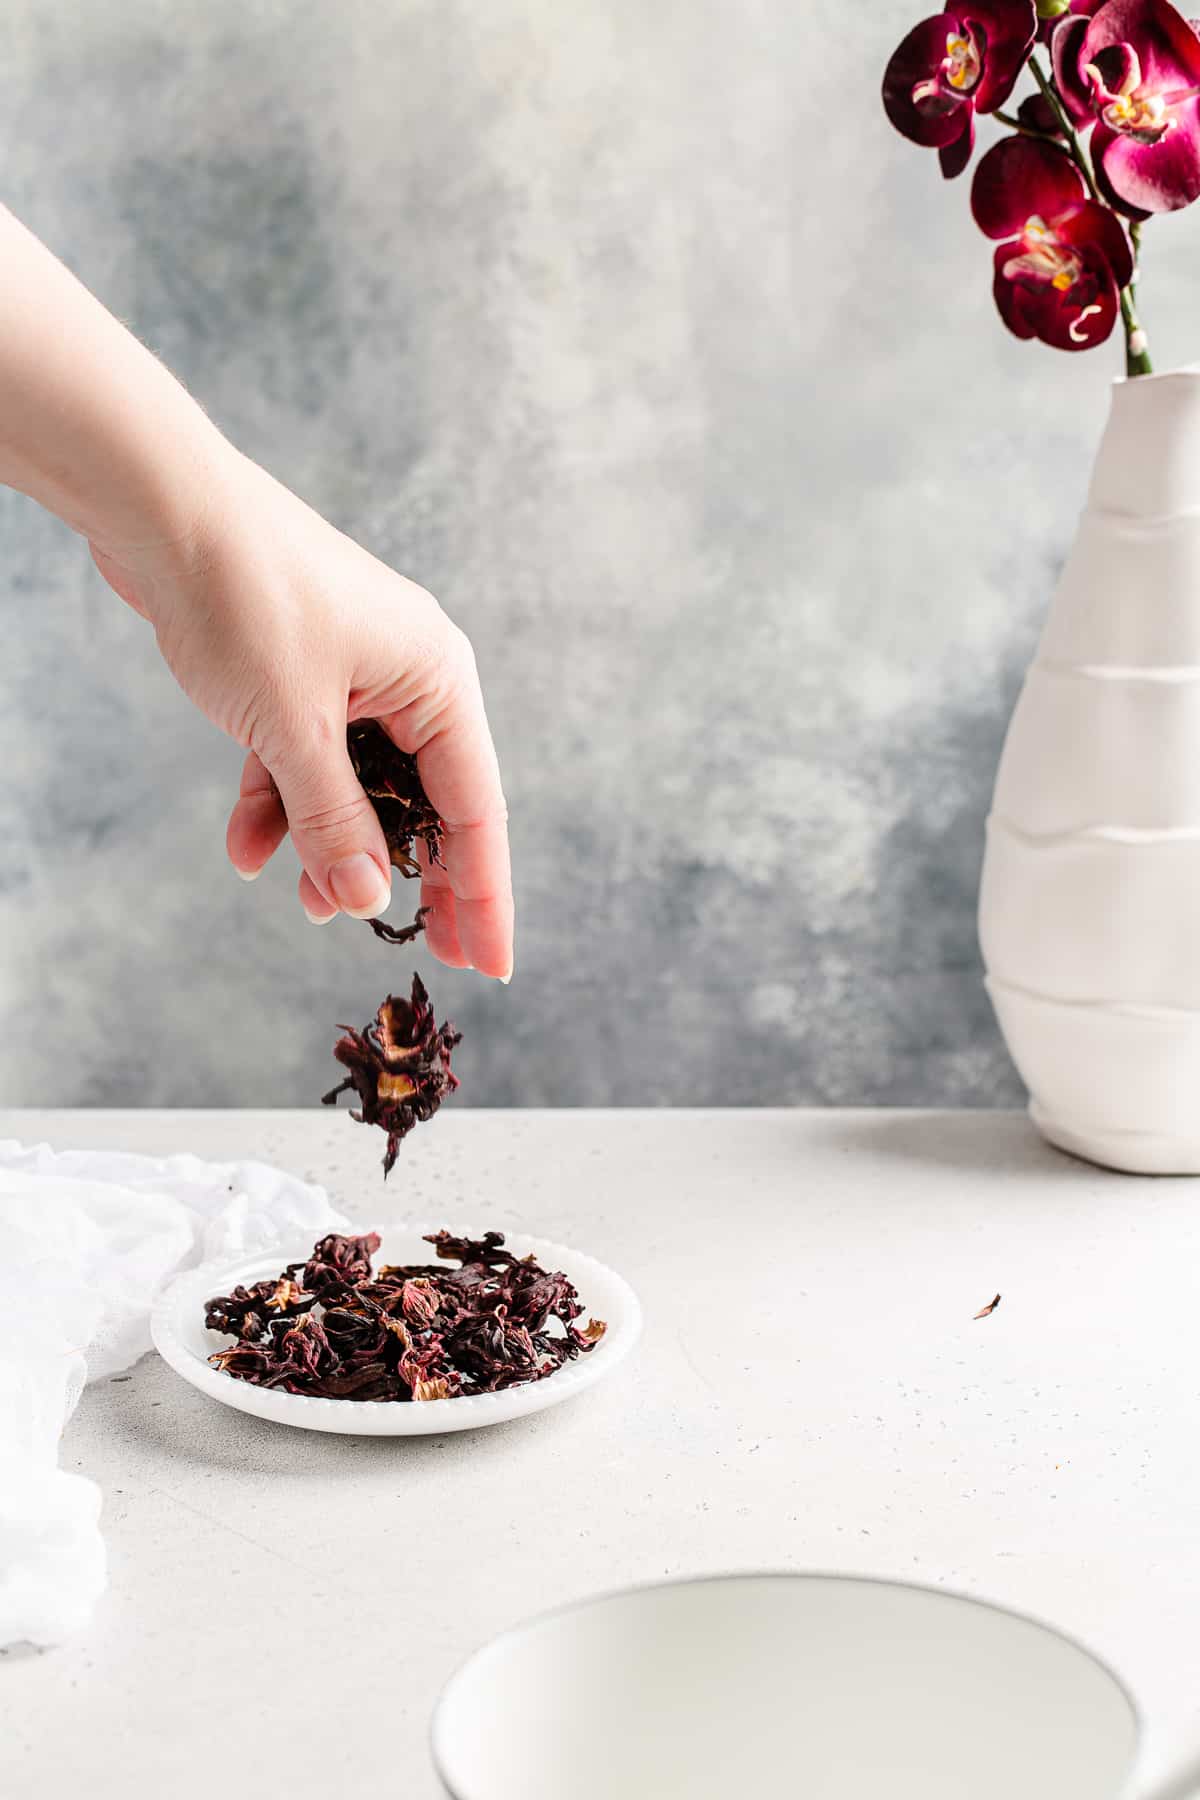 Hand dropping dried hibiscus flowers onto a plate with purple orchids in a vase in the background.